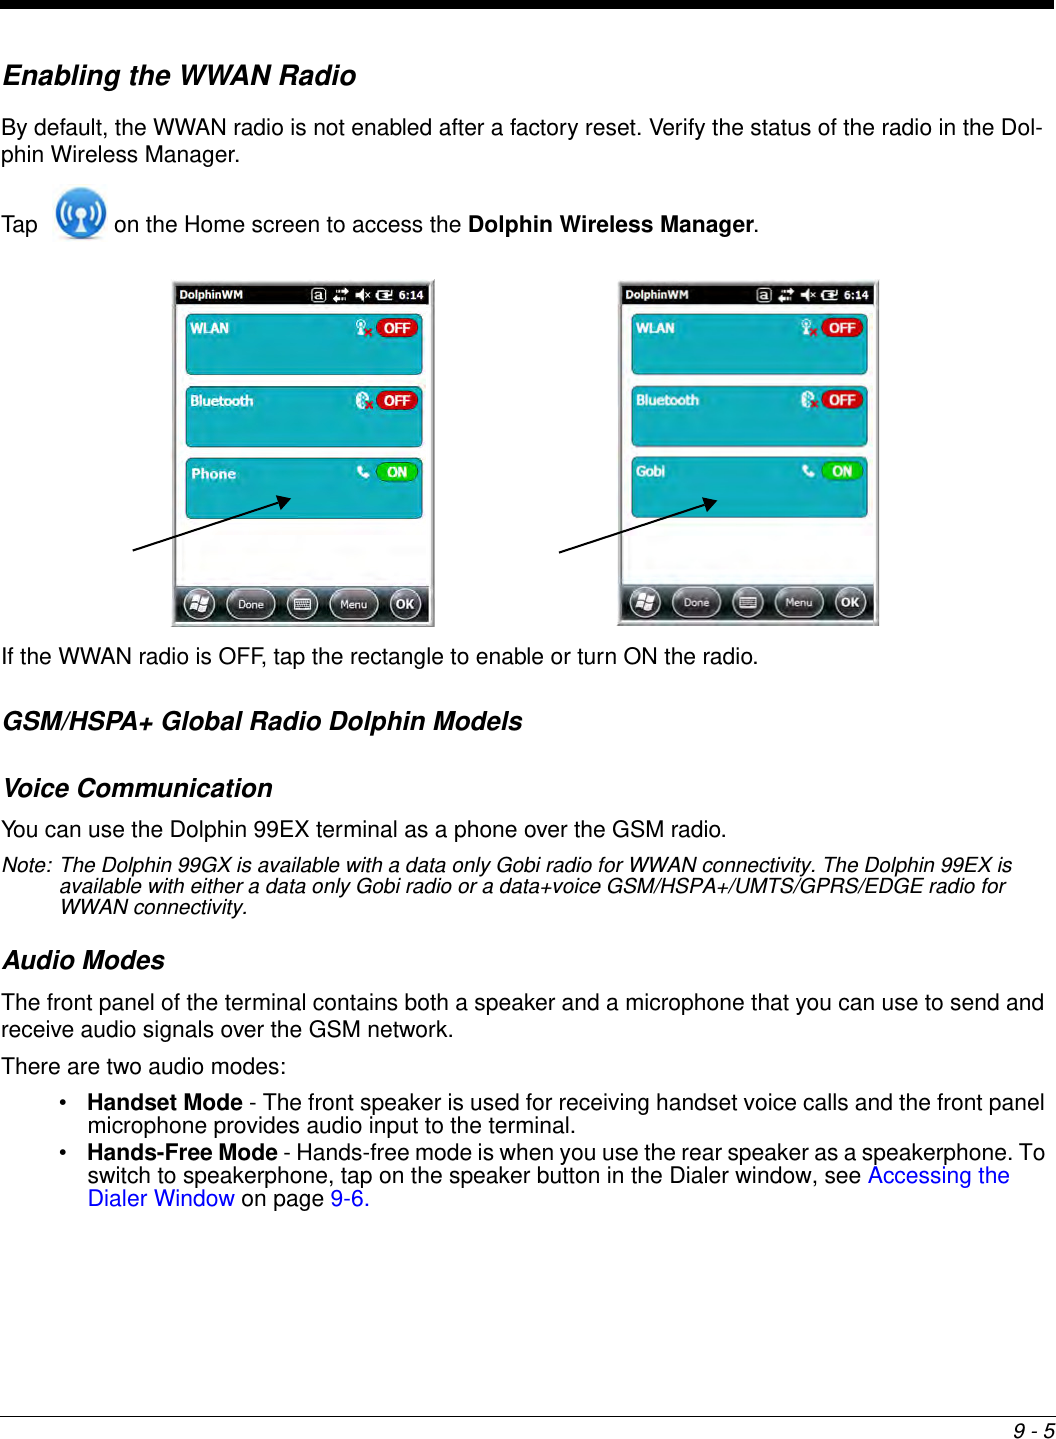 9 - 5Enabling the WWAN RadioBy default, the WWAN radio is not enabled after a factory reset. Verify the status of the radio in the Dol-phin Wireless Manager.Tap   on the Home screen to access the Dolphin Wireless Manager.If the WWAN radio is OFF, tap the rectangle to enable or turn ON the radio. GSM/HSPA+ Global Radio Dolphin ModelsVoice CommunicationYou can use the Dolphin 99EX terminal as a phone over the GSM radio.Note: The Dolphin 99GX is available with a data only Gobi radio for WWAN connectivity. The Dolphin 99EX is available with either a data only Gobi radio or a data+voice GSM/HSPA+/UMTS/GPRS/EDGE radio for WWAN connectivity.Audio ModesThe front panel of the terminal contains both a speaker and a microphone that you can use to send and receive audio signals over the GSM network.There are two audio modes:•Handset Mode - The front speaker is used for receiving handset voice calls and the front panel microphone provides audio input to the terminal. •Hands-Free Mode - Hands-free mode is when you use the rear speaker as a speakerphone. To switch to speakerphone, tap on the speaker button in the Dialer window, see Accessing the Dialer Window on page 9-6.  